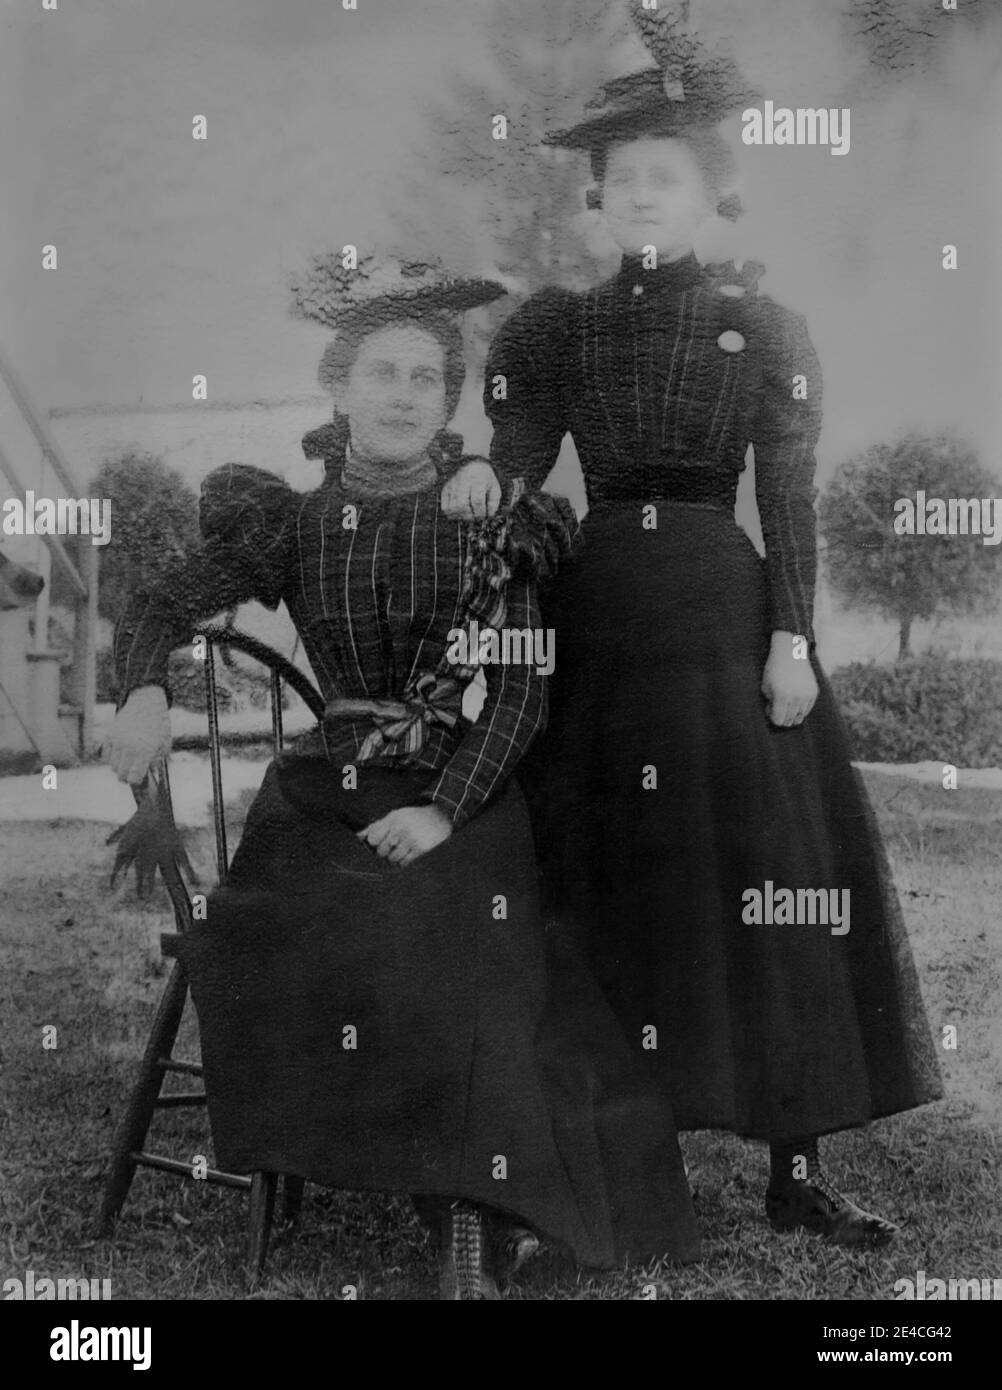 American archive monochrome portrait  of two women wearing matching tartan outfits in a garden. One young woman is standing and one woman is seated on a chair.. Taken in the late 19th century in Port Byron, NY, USA Stock Photo